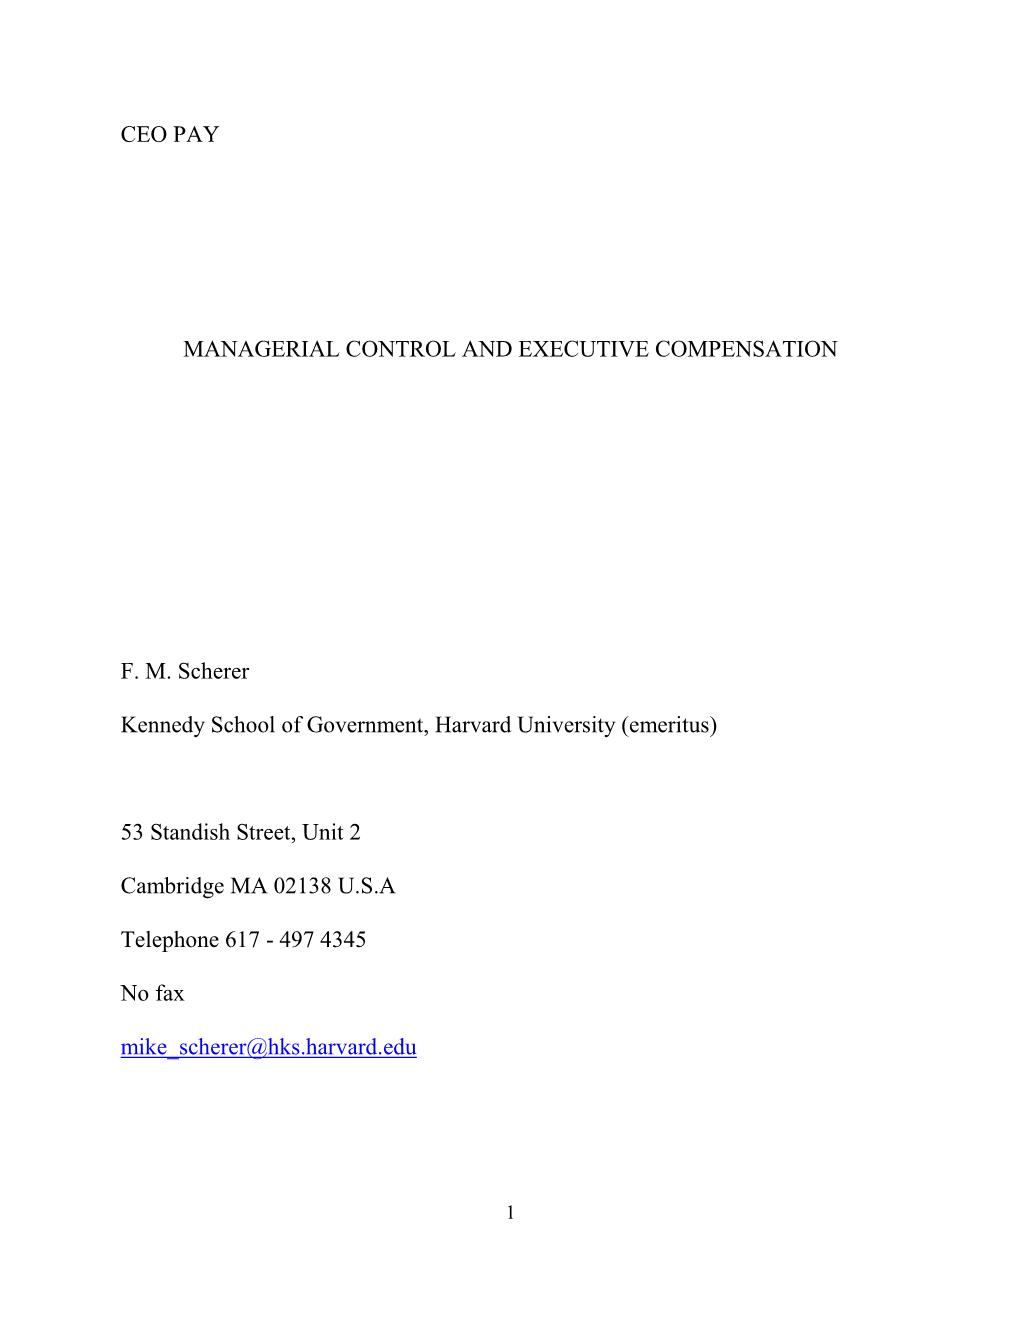 Ceo Pay Managerial Control And